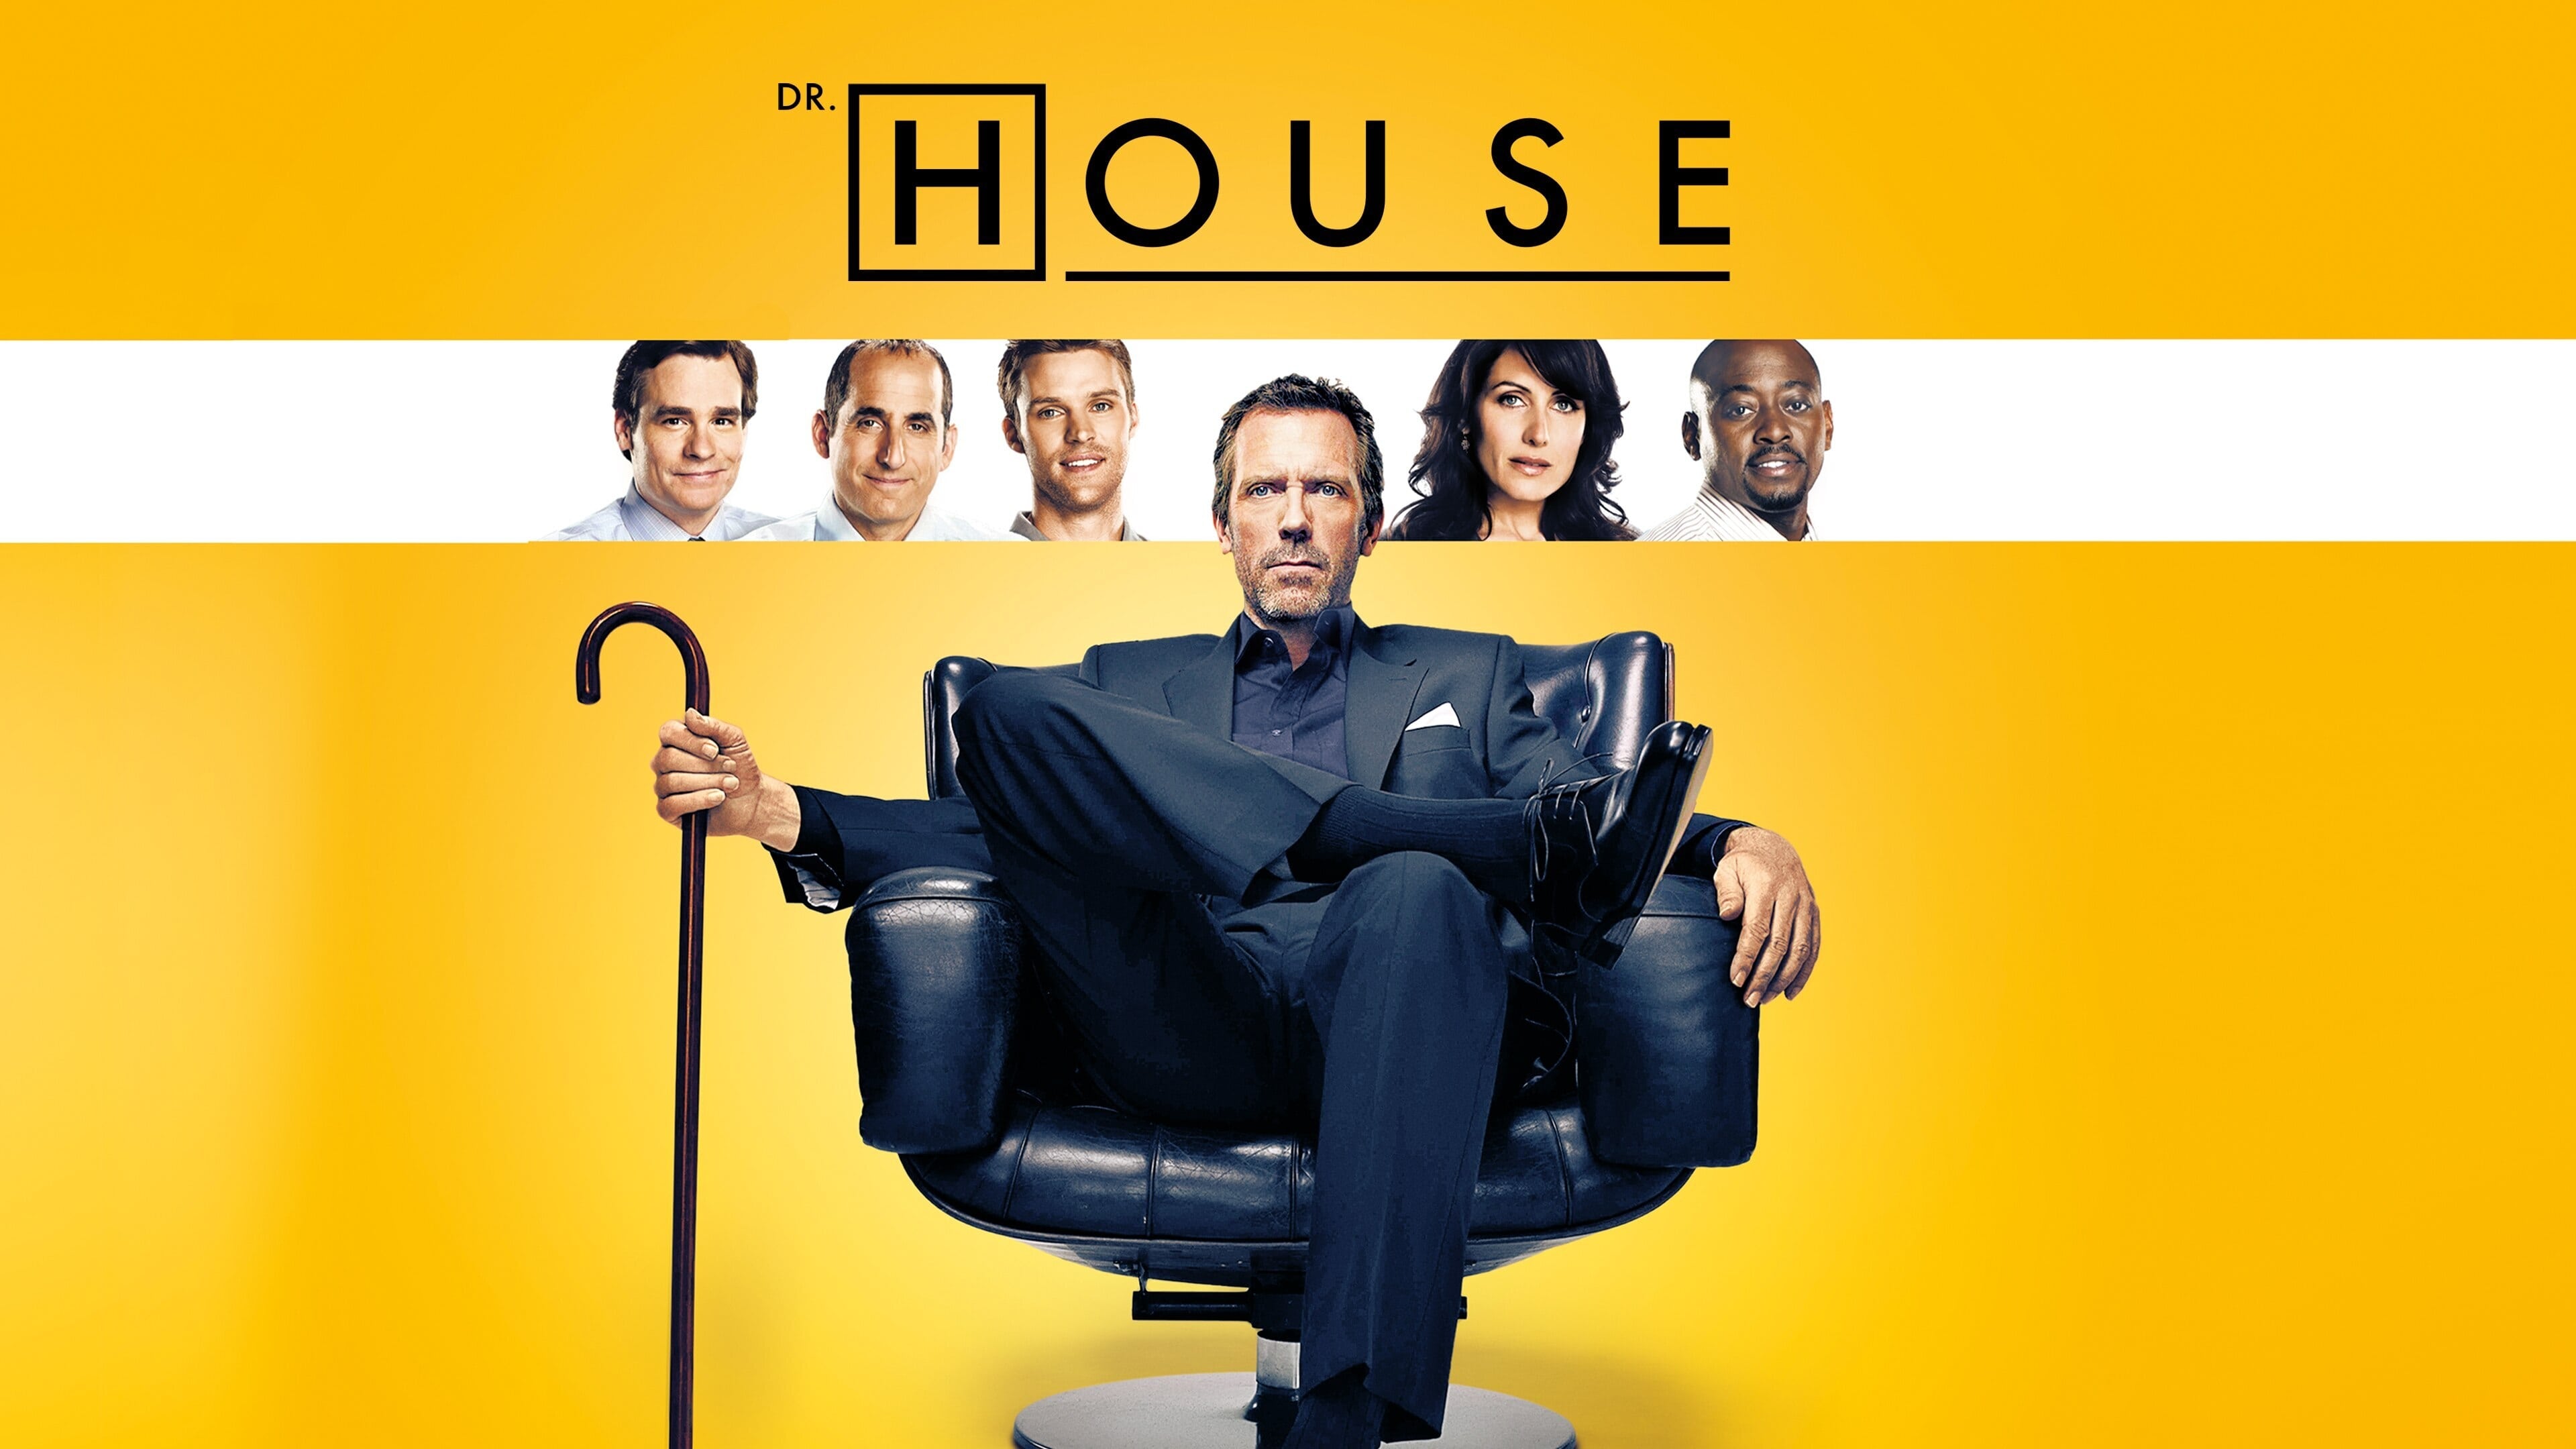 Dr. House – Doctor House